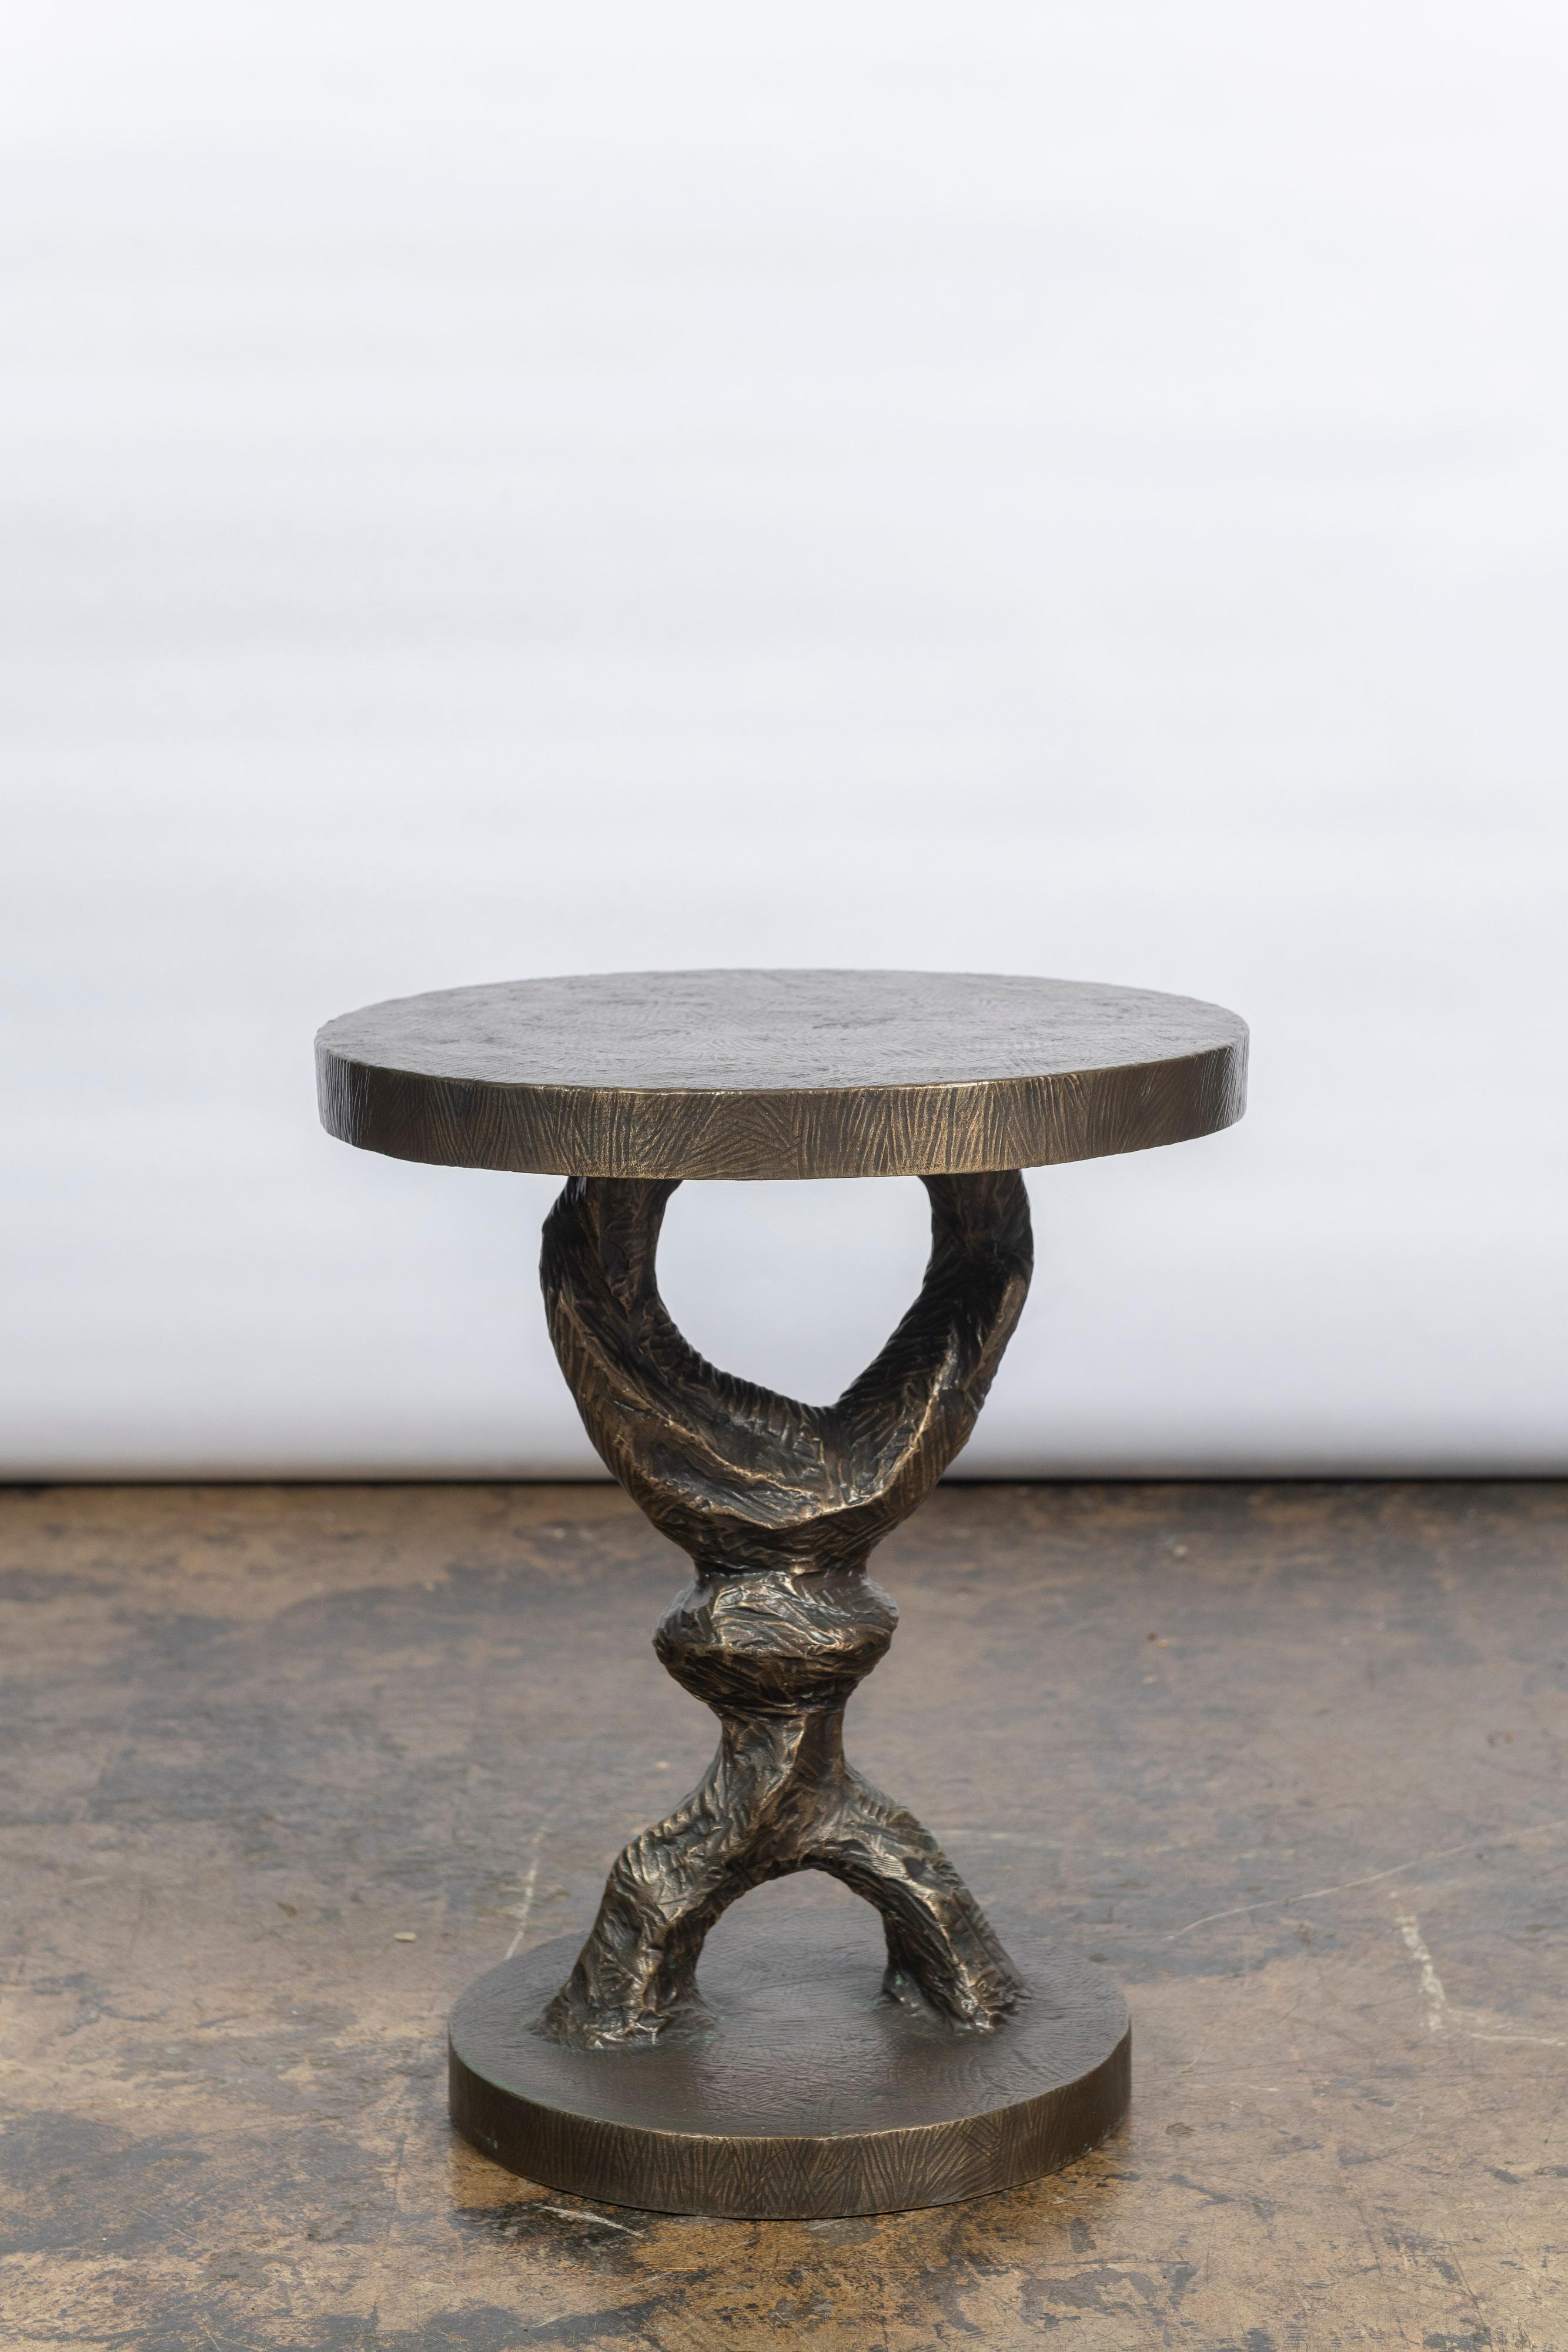 A beautiful table / pedestal by renowned American artist/ sculptor Tom Corbin. A piece of art on its own, this work is a great size to hold a beverage, light source, plant or florals. Corbin's furniture and sculpture is highly coveted as seen in